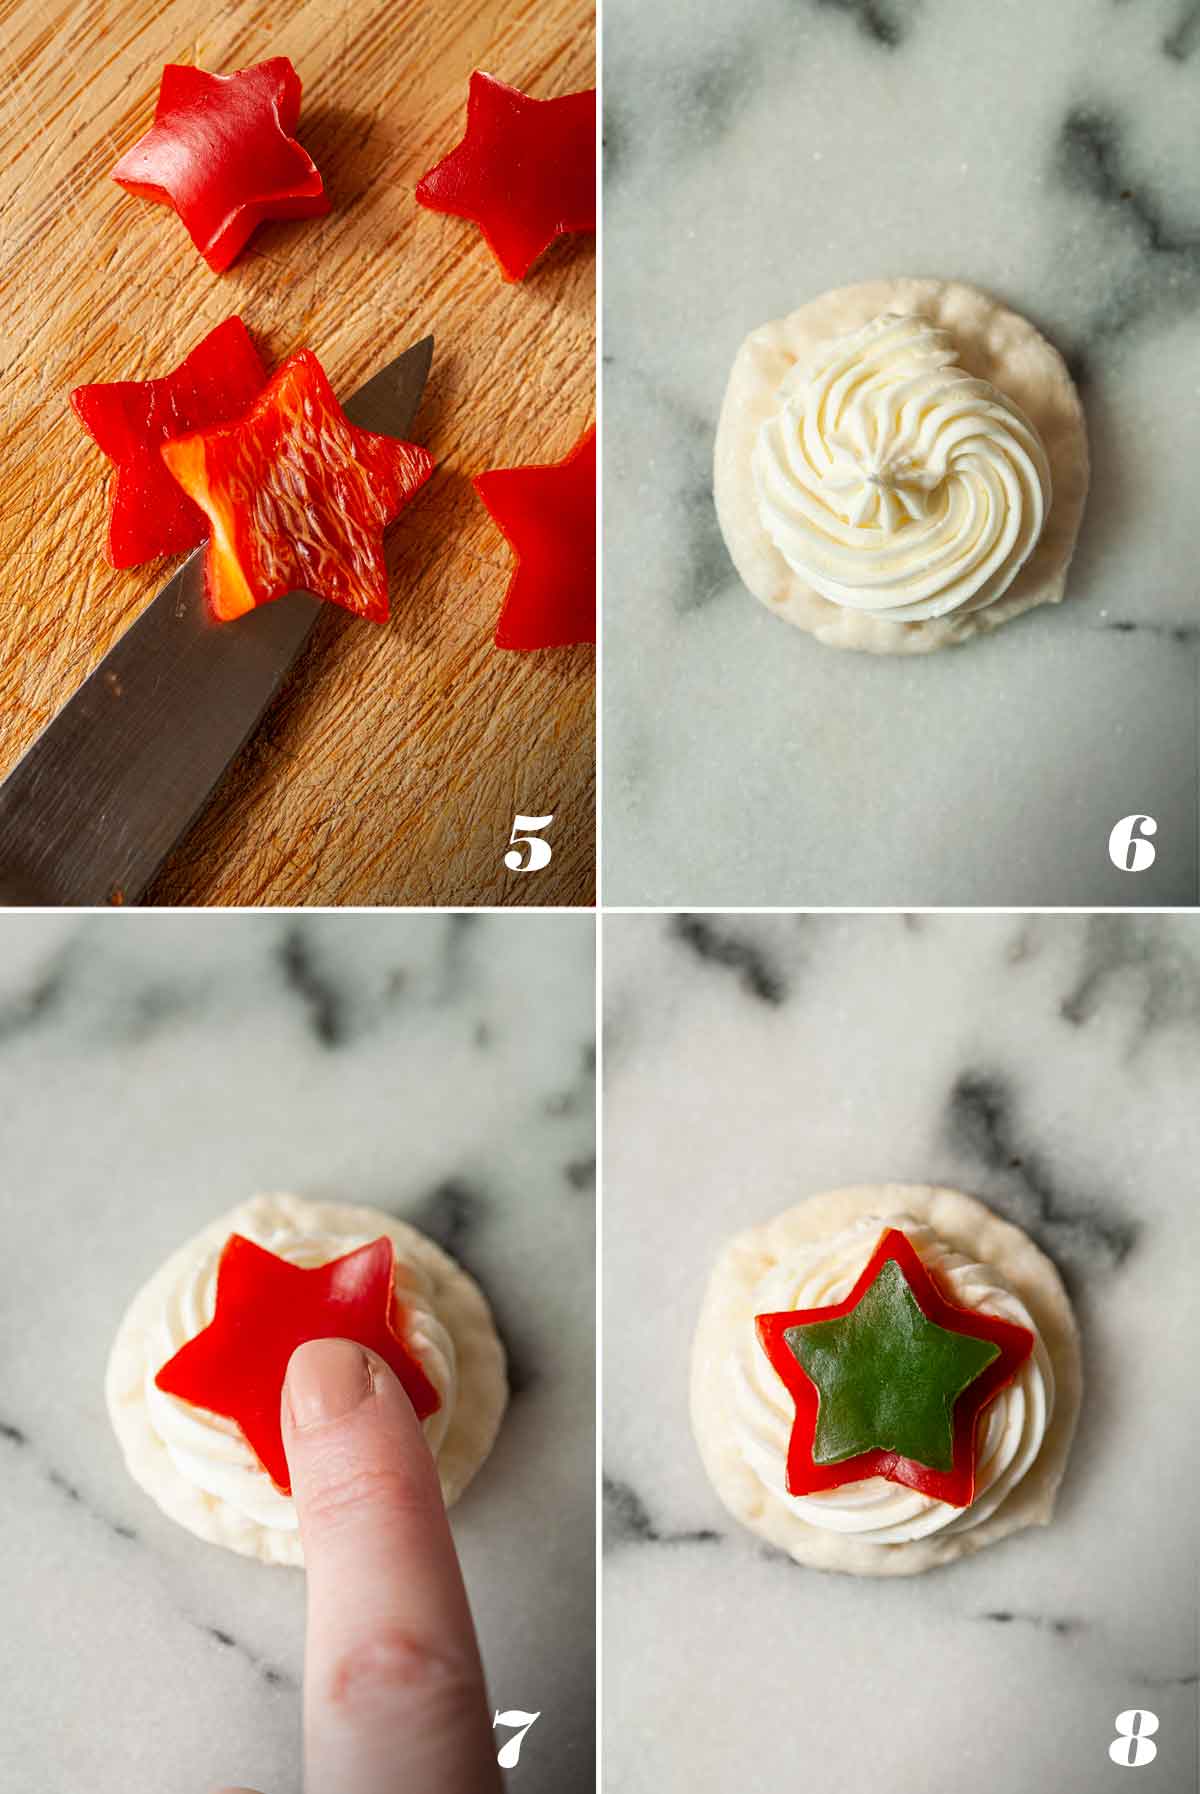 A collage of 4 numbered images showing how to make pepper star appetizers.